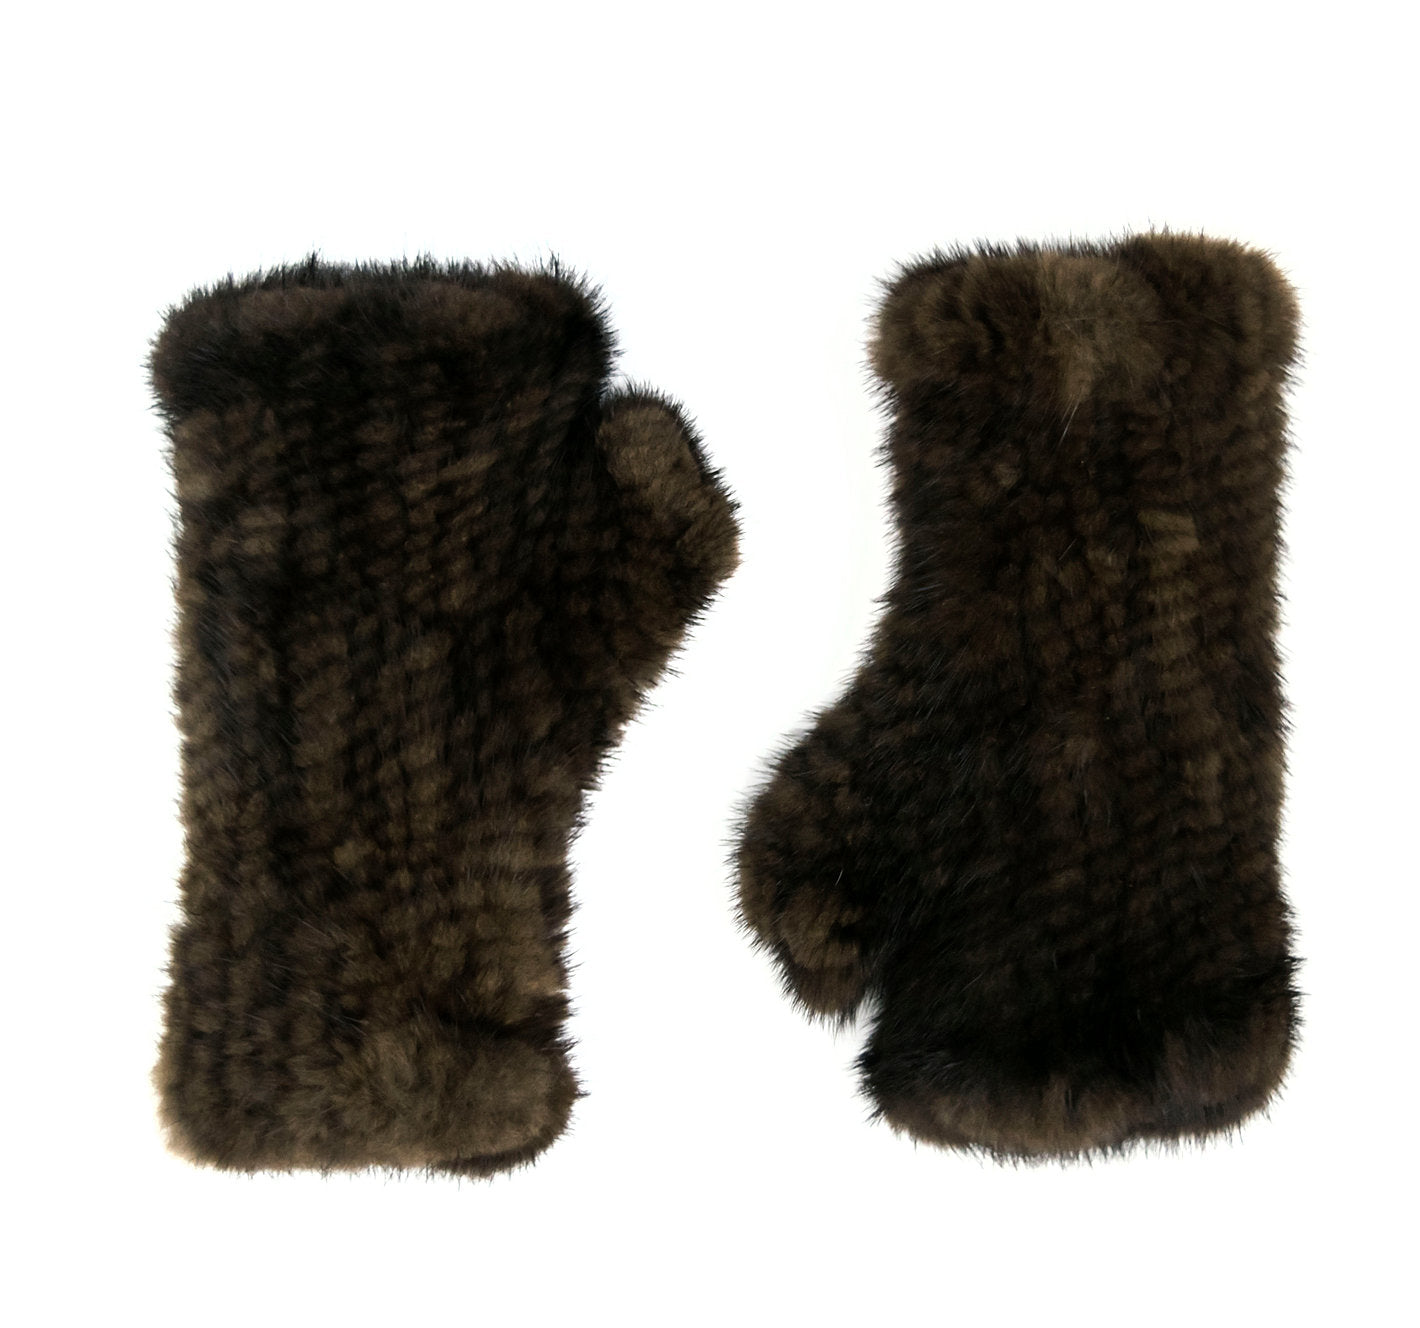 Mink Handwarmer With Thumbhole (black or brown)